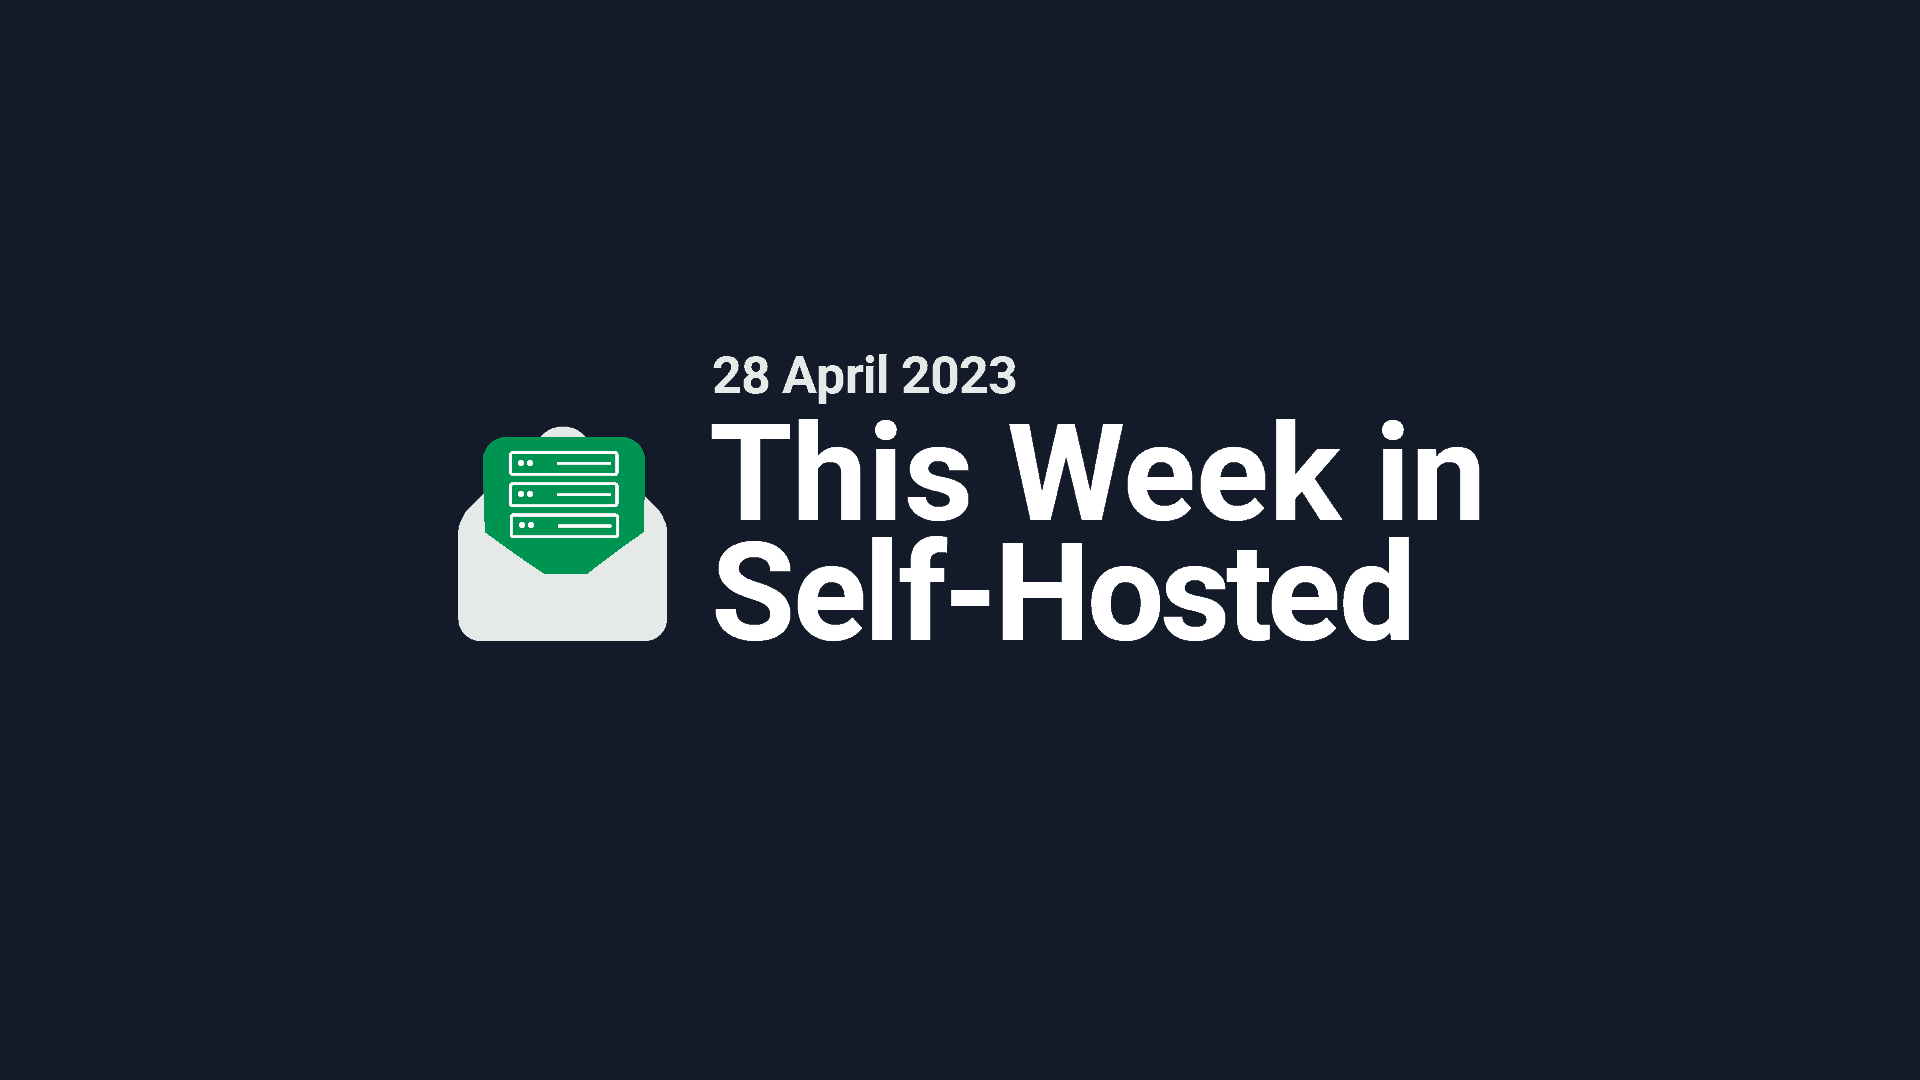 This Week in Self-Hosted (28 April 2023) Post image